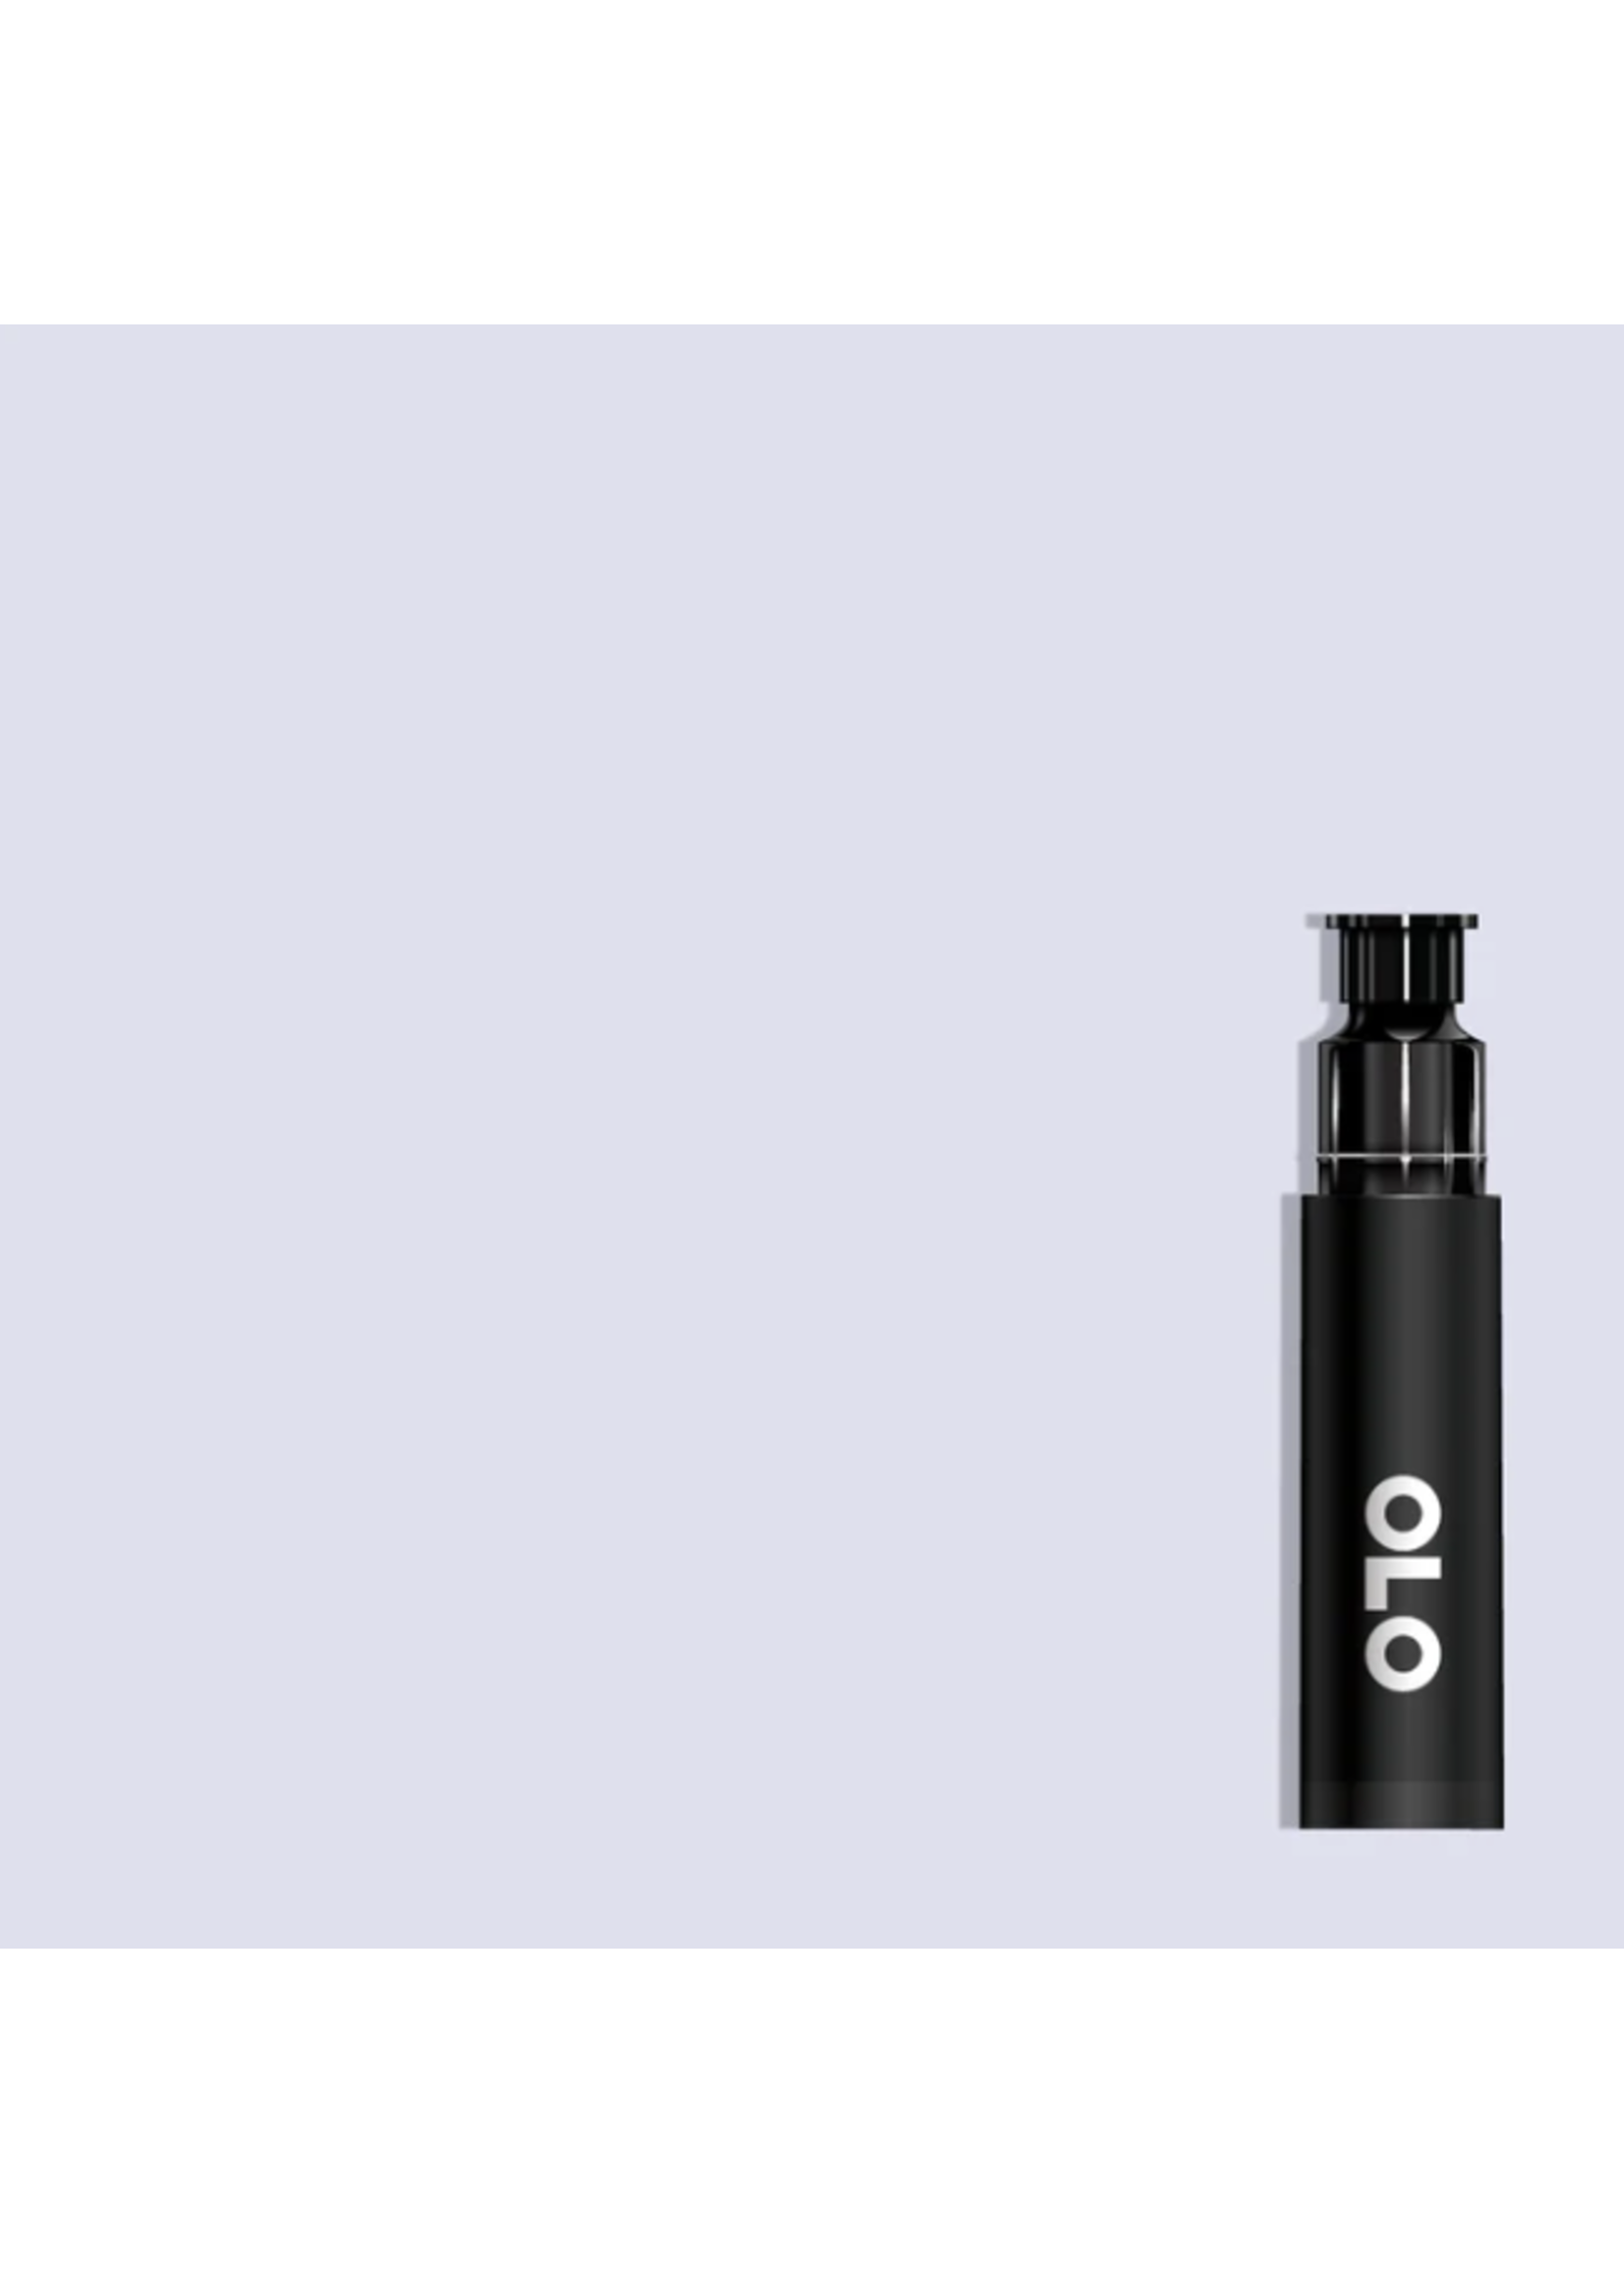 OLO OLO Brush Replacement Cartridge: Light Periwinkle